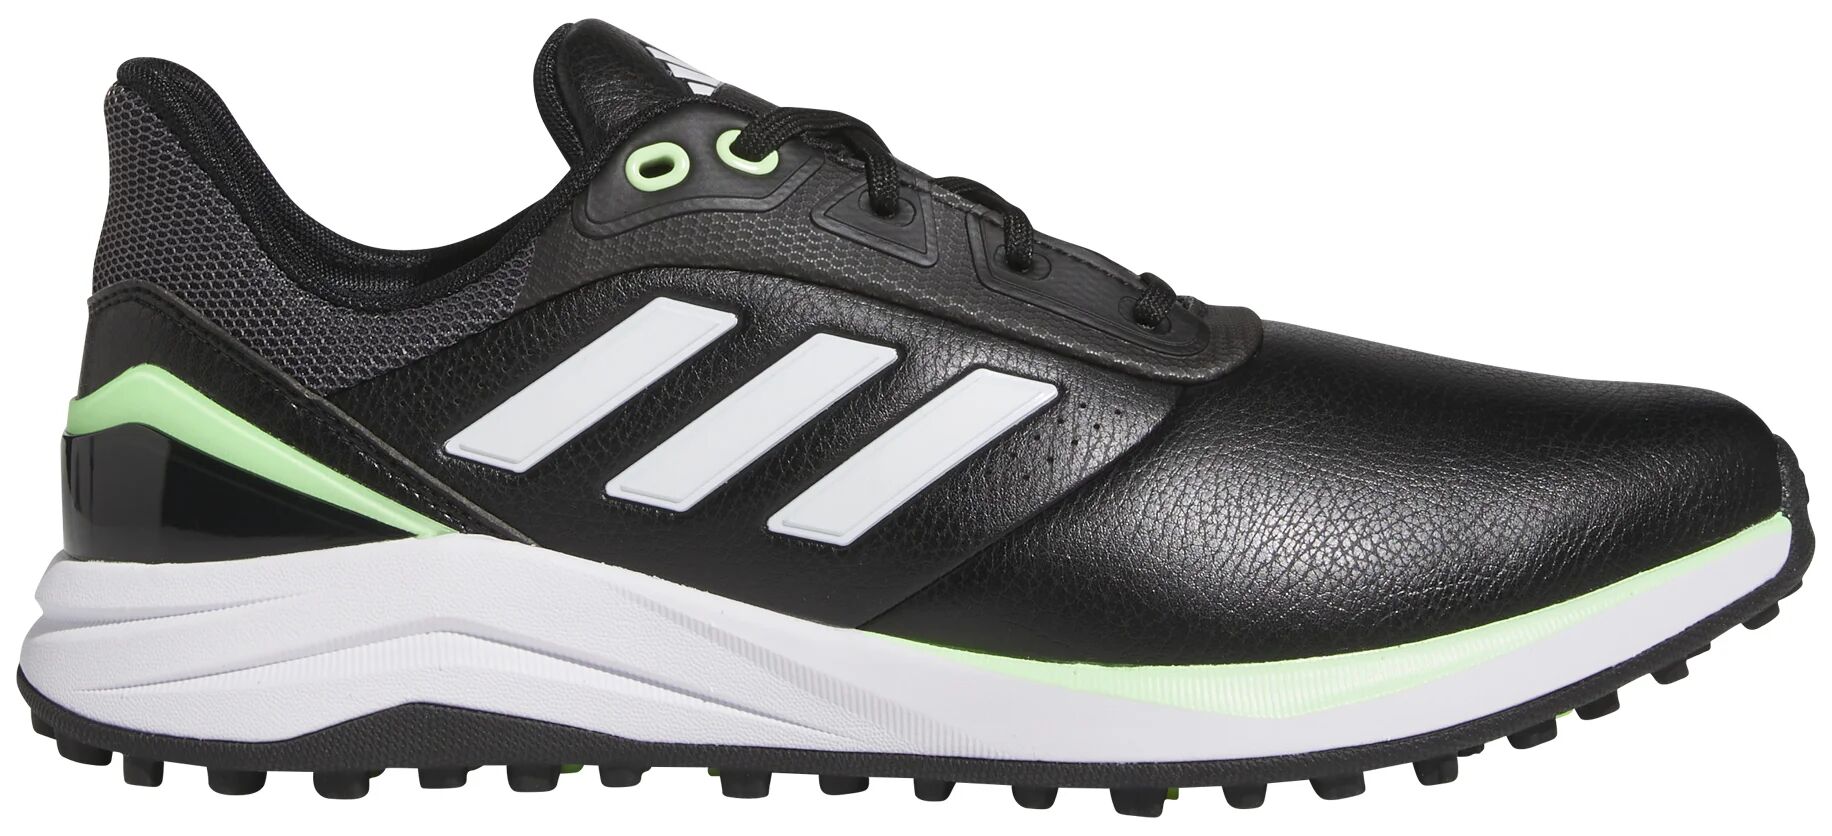 adidas Solarmotion Spikeless 24 Golf Shoes - Core Black/Cloud White/Green Spark - 10.5 - WIDE